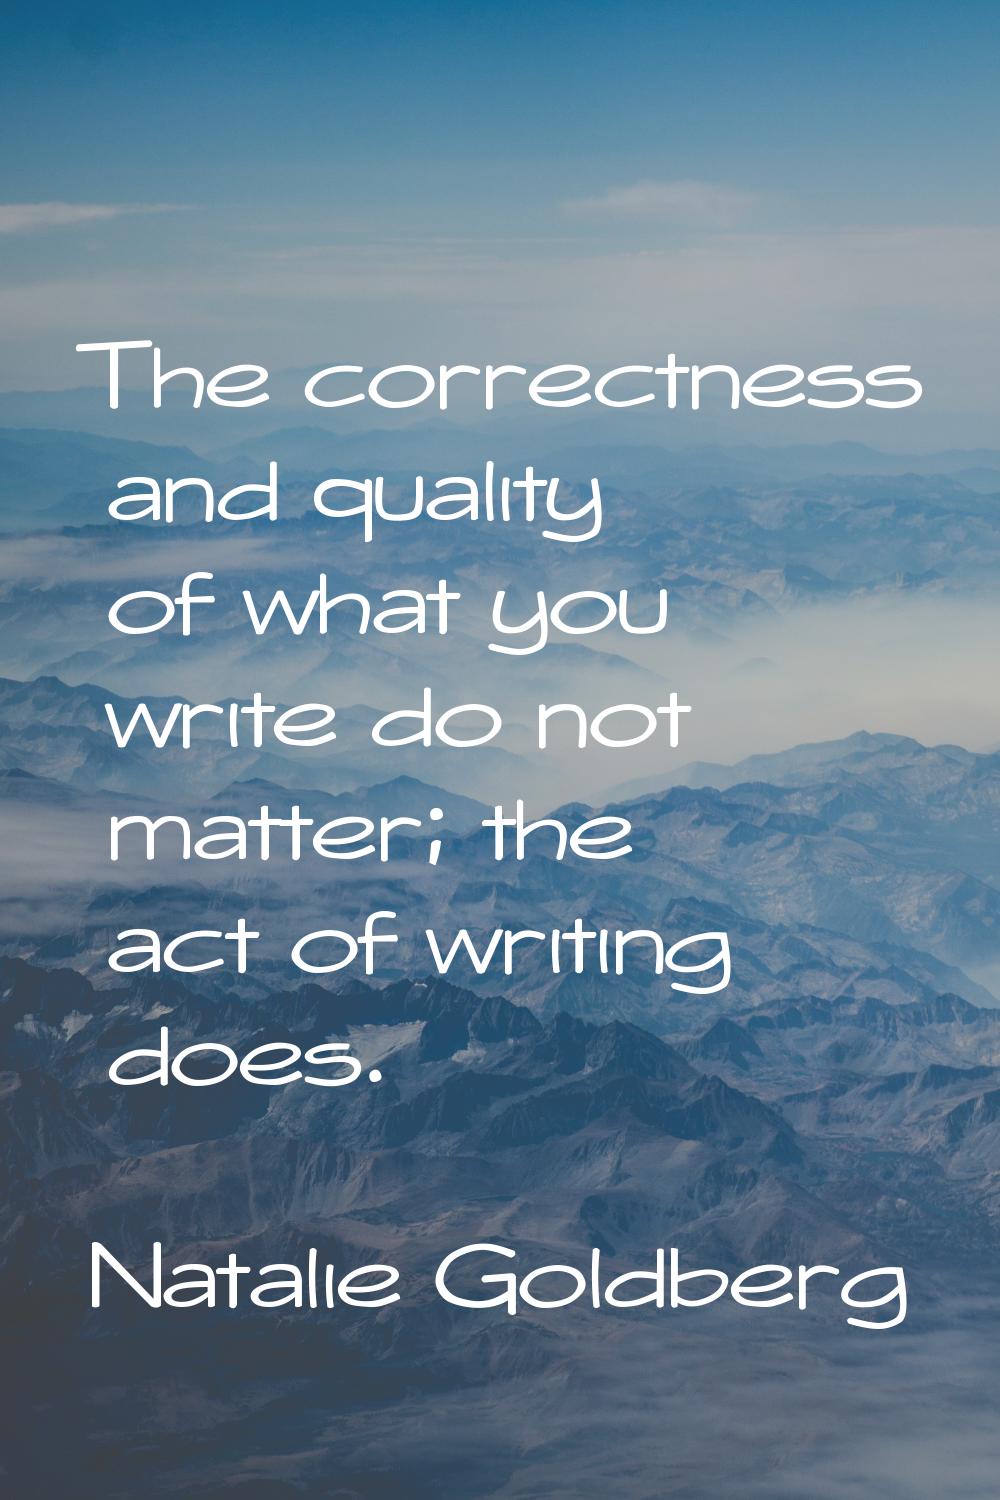 The correctness and quality of what you write do not matter; the act of writing does.